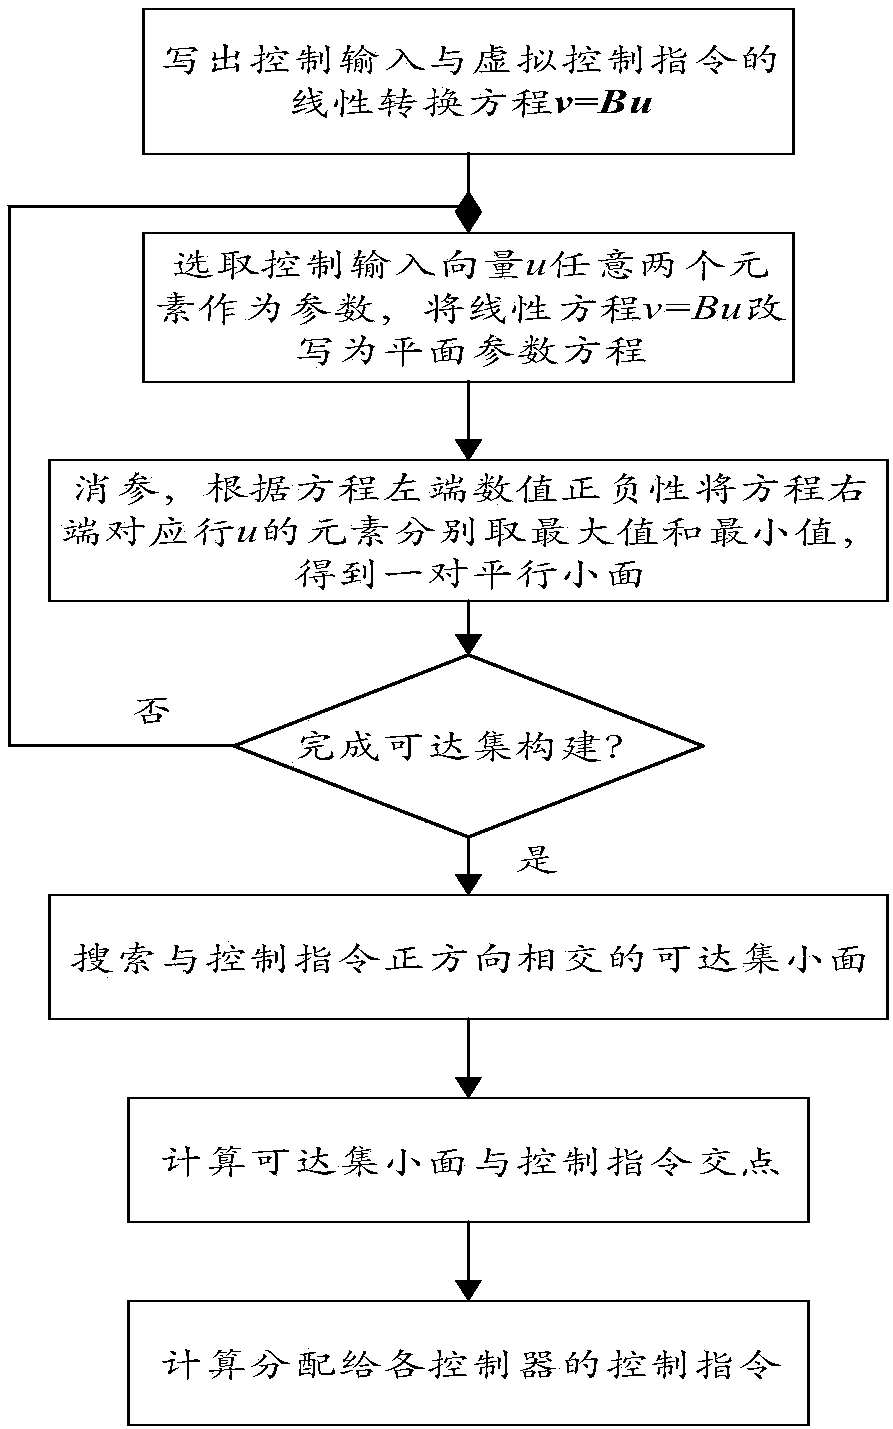 Overdrive system control allocation method based on geometrically intuitively built reachable set